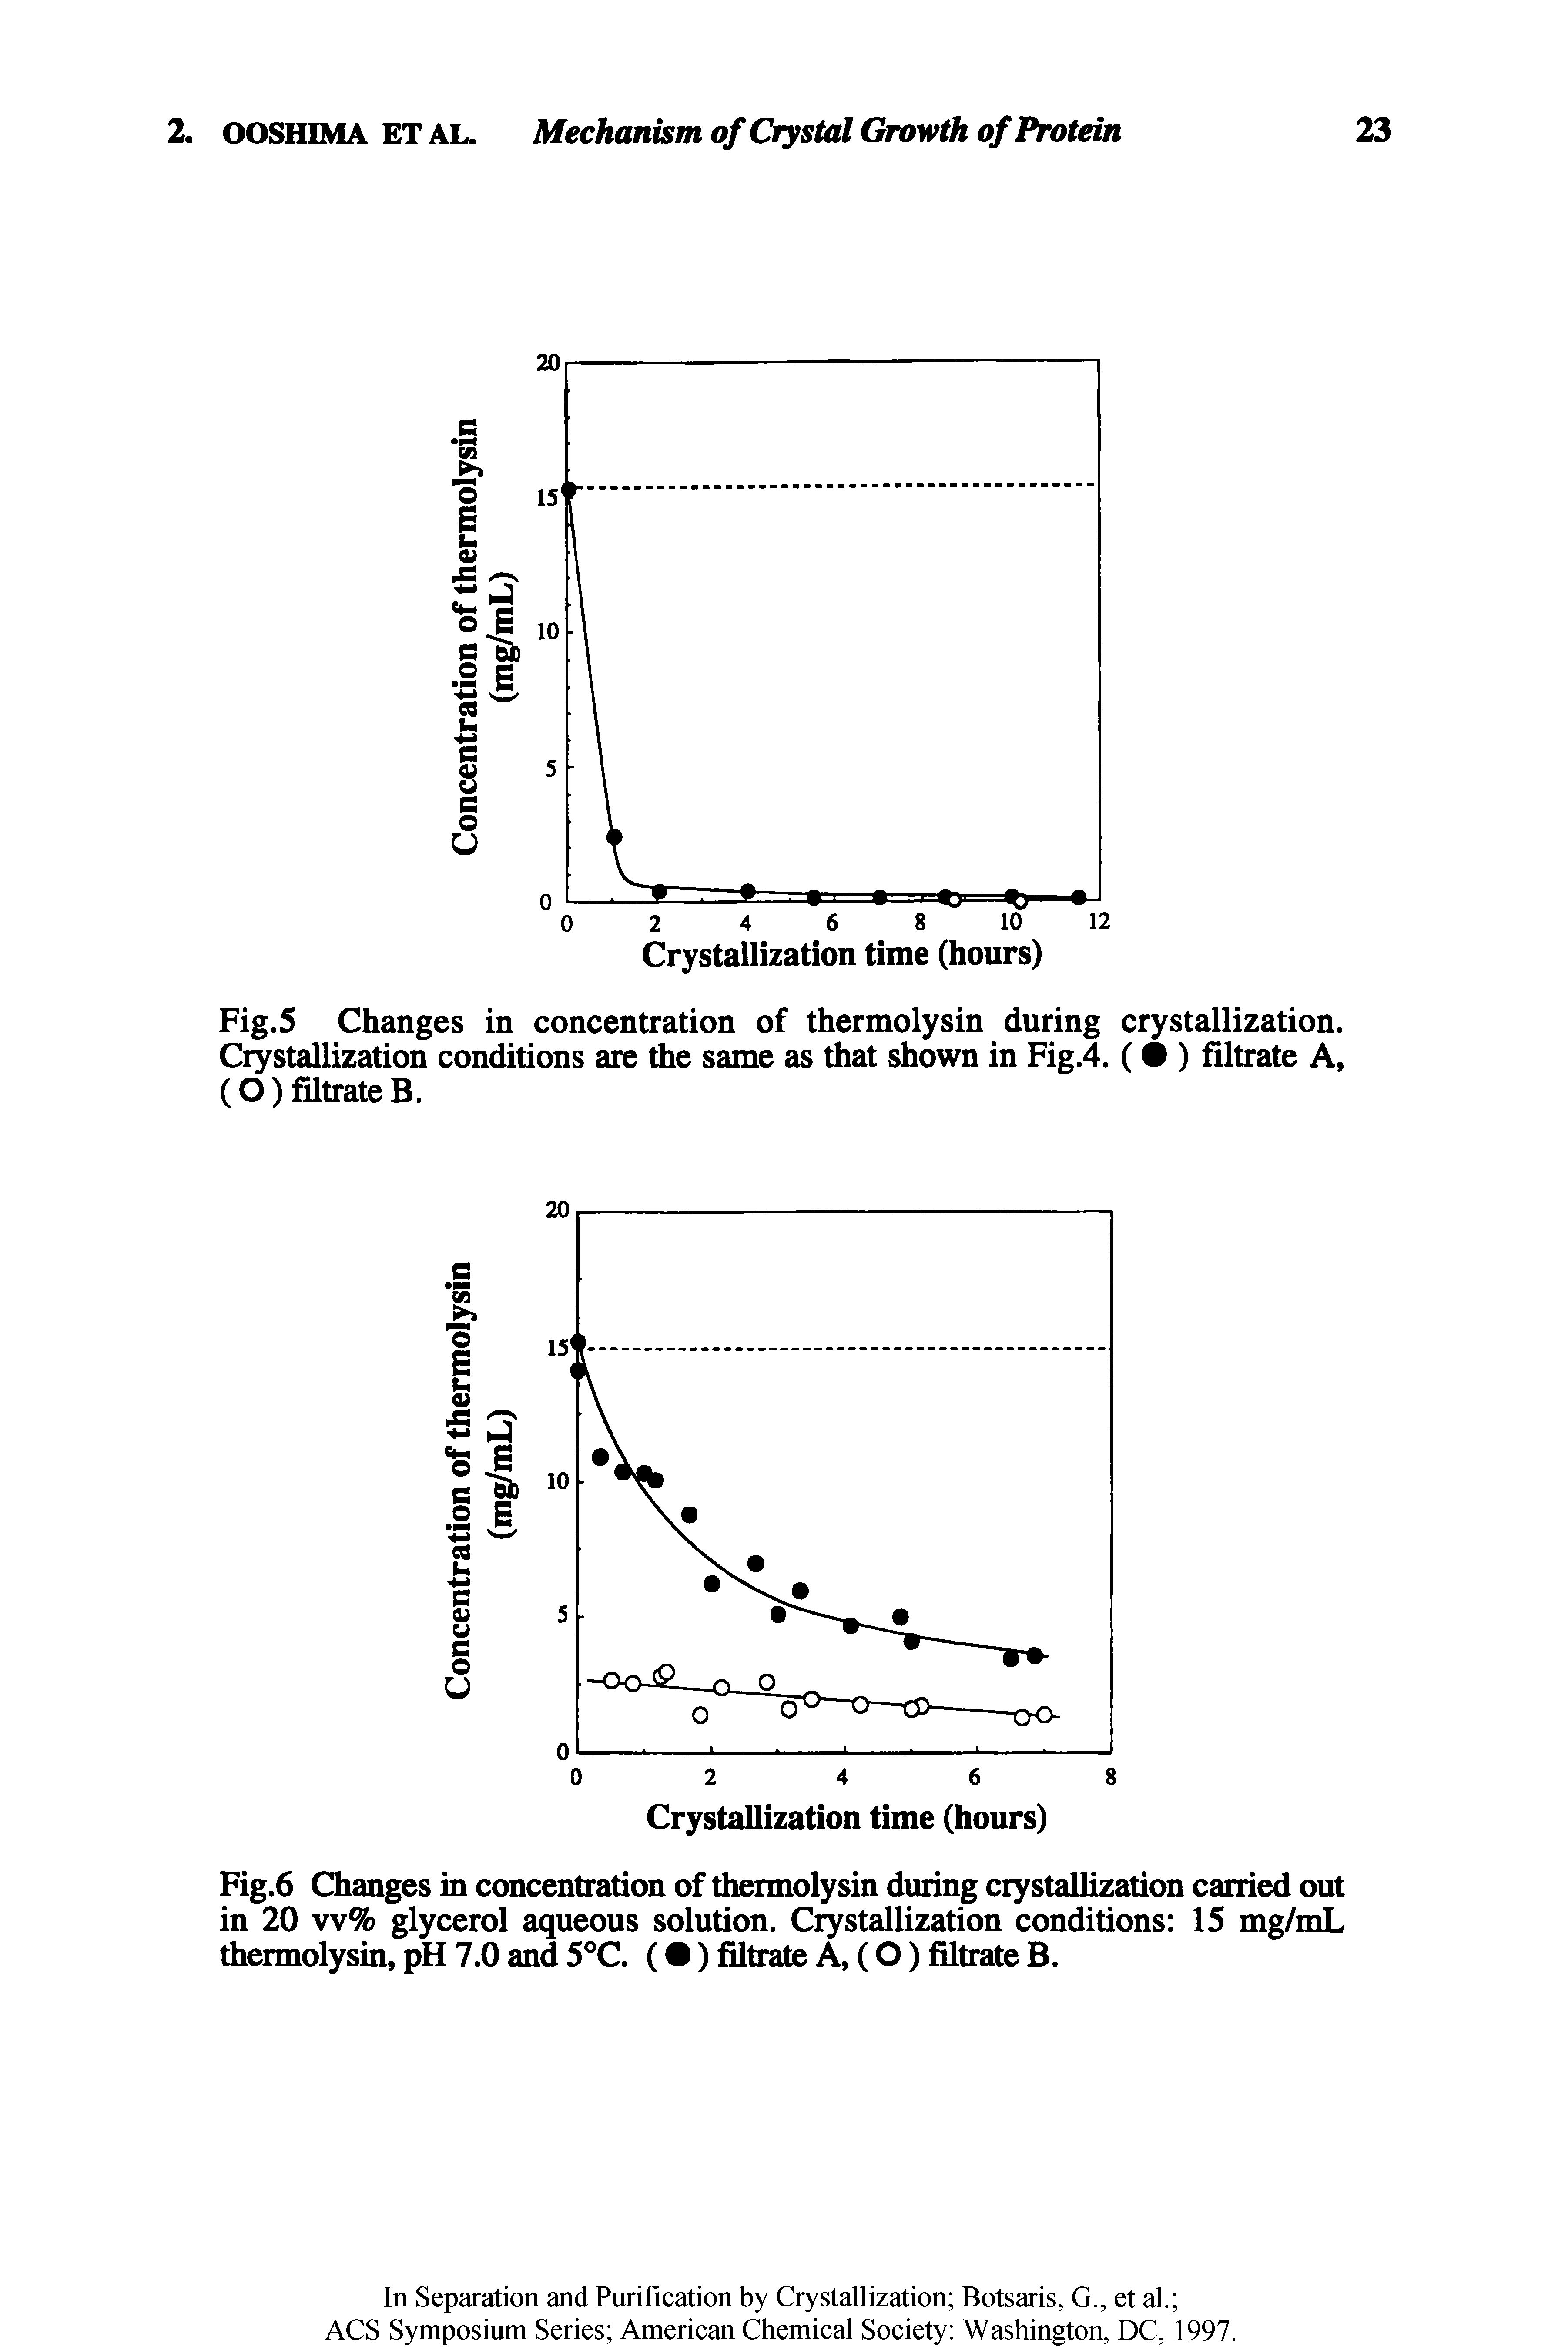 Fig.6 Changes in concentration of thermolysin during crystallization carried out in 20 w% glycerol aqueous solution. Crystallization conditions 15 mg/mL thermolysin, pH 7.0 and 5 C. ( ) filtrate A, (O) filtrate B.